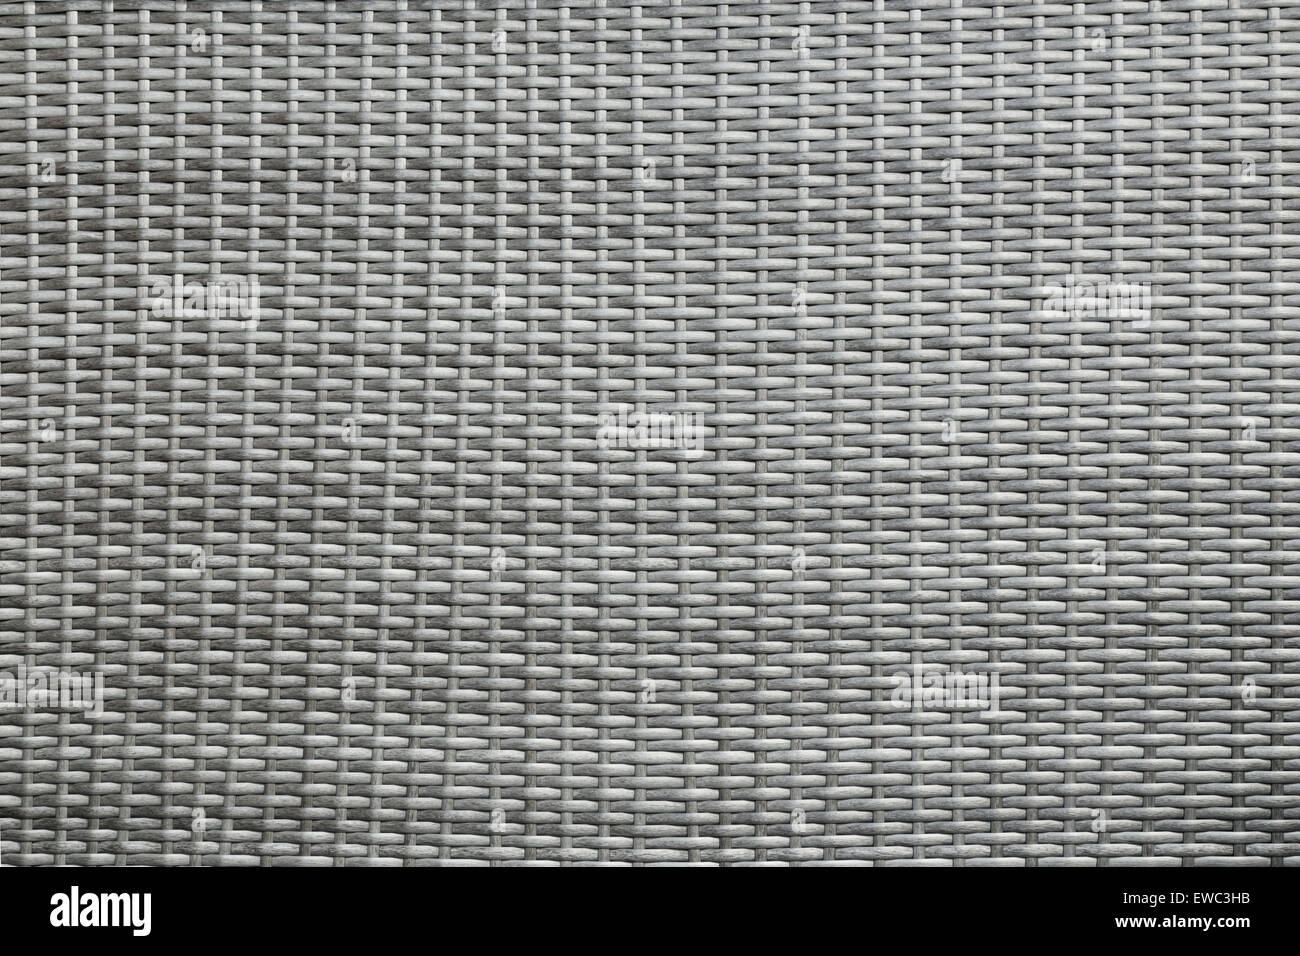 Grey woven webbing background with pattern texture and structure Stock Photo